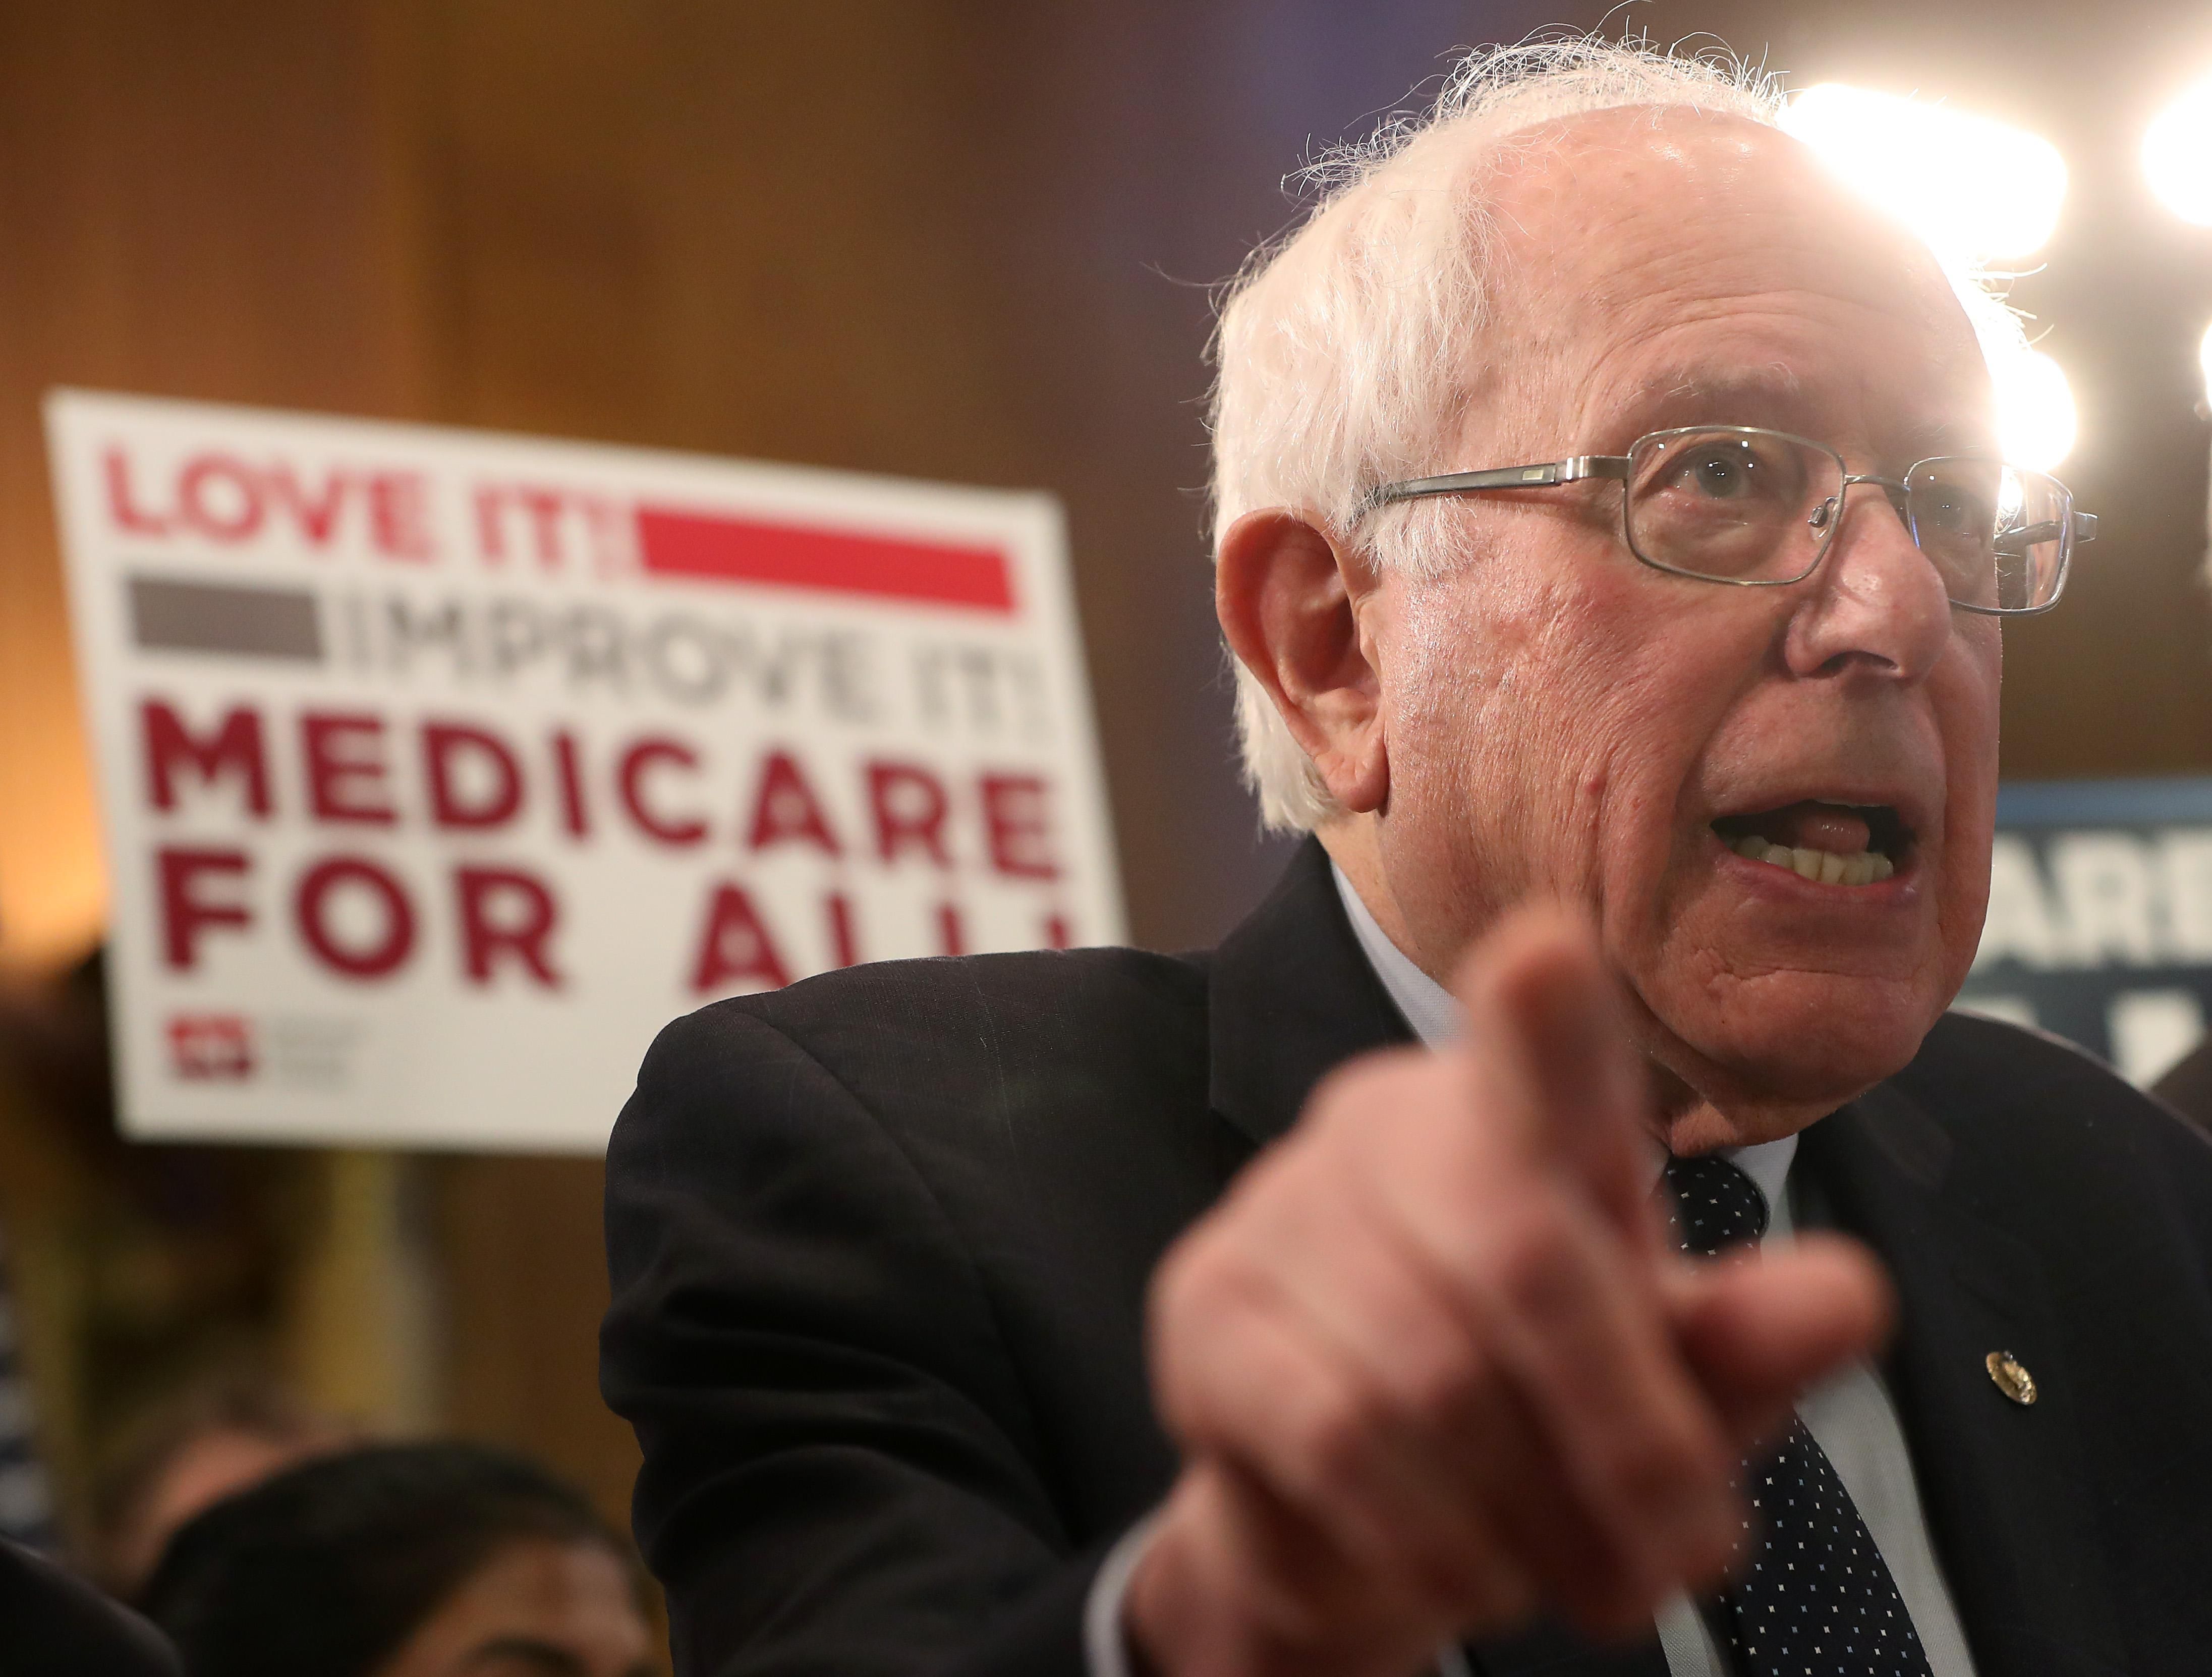 Sen. Bernie Sanders (I-VT) speaks while introducing health care legislation titled the 'Medicare for All Act of 2019', during a news conference on Capitol Hill, on April 9, 2019 in Washington, DC. (Photo by Mark Wilson/Getty Images)